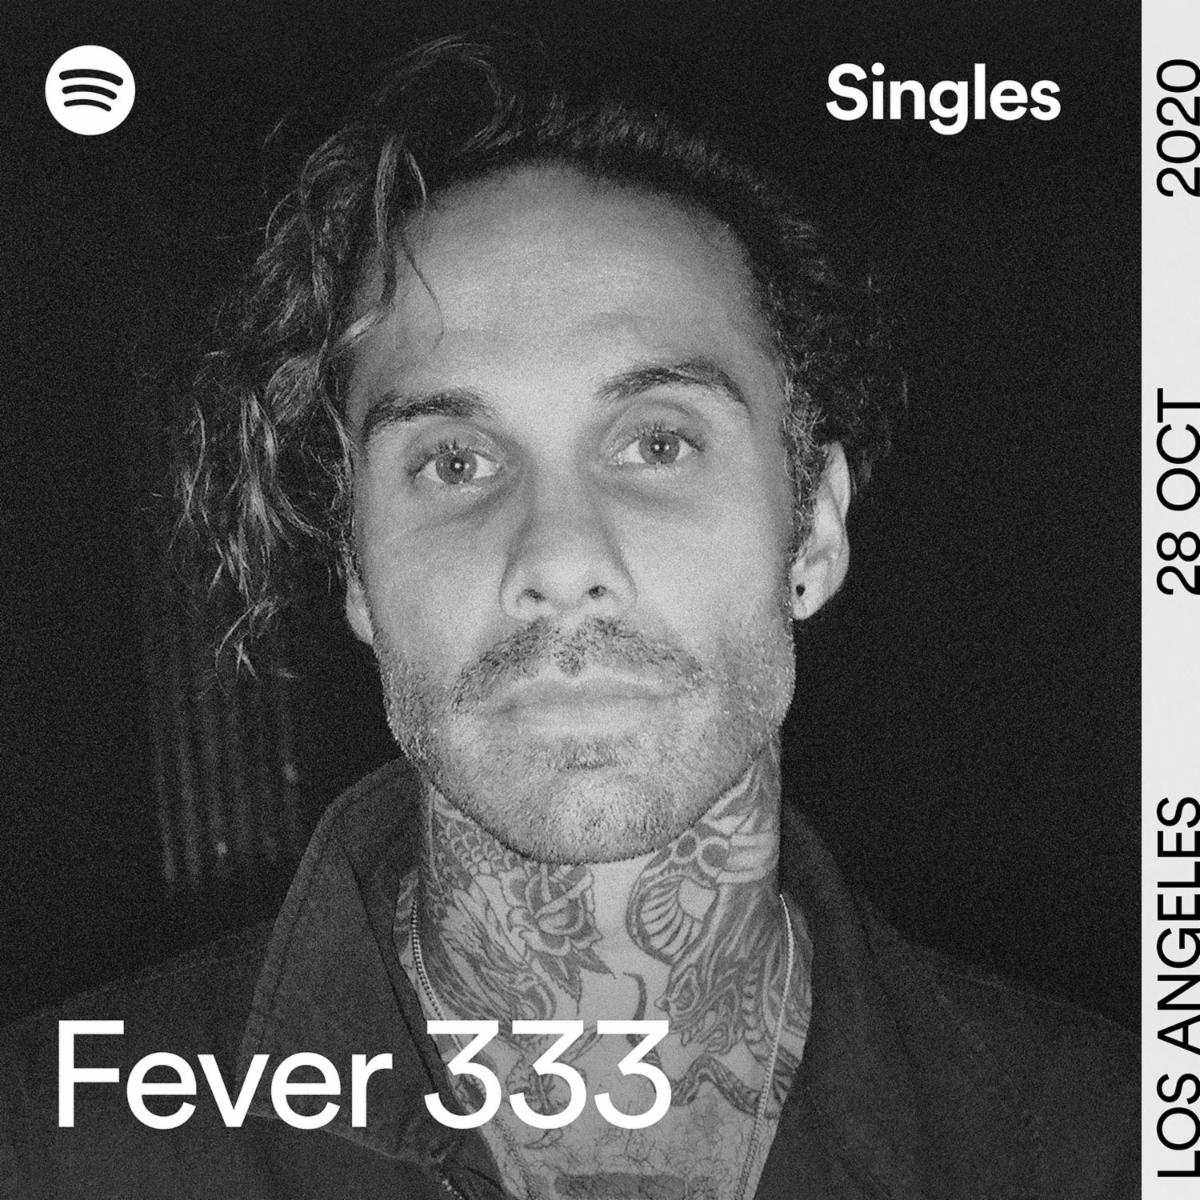 FEVER 333 & GRANDSON RECORD COVERS OF LINKIN PARK CLASSICS FOR SPOTIFY SINGLES